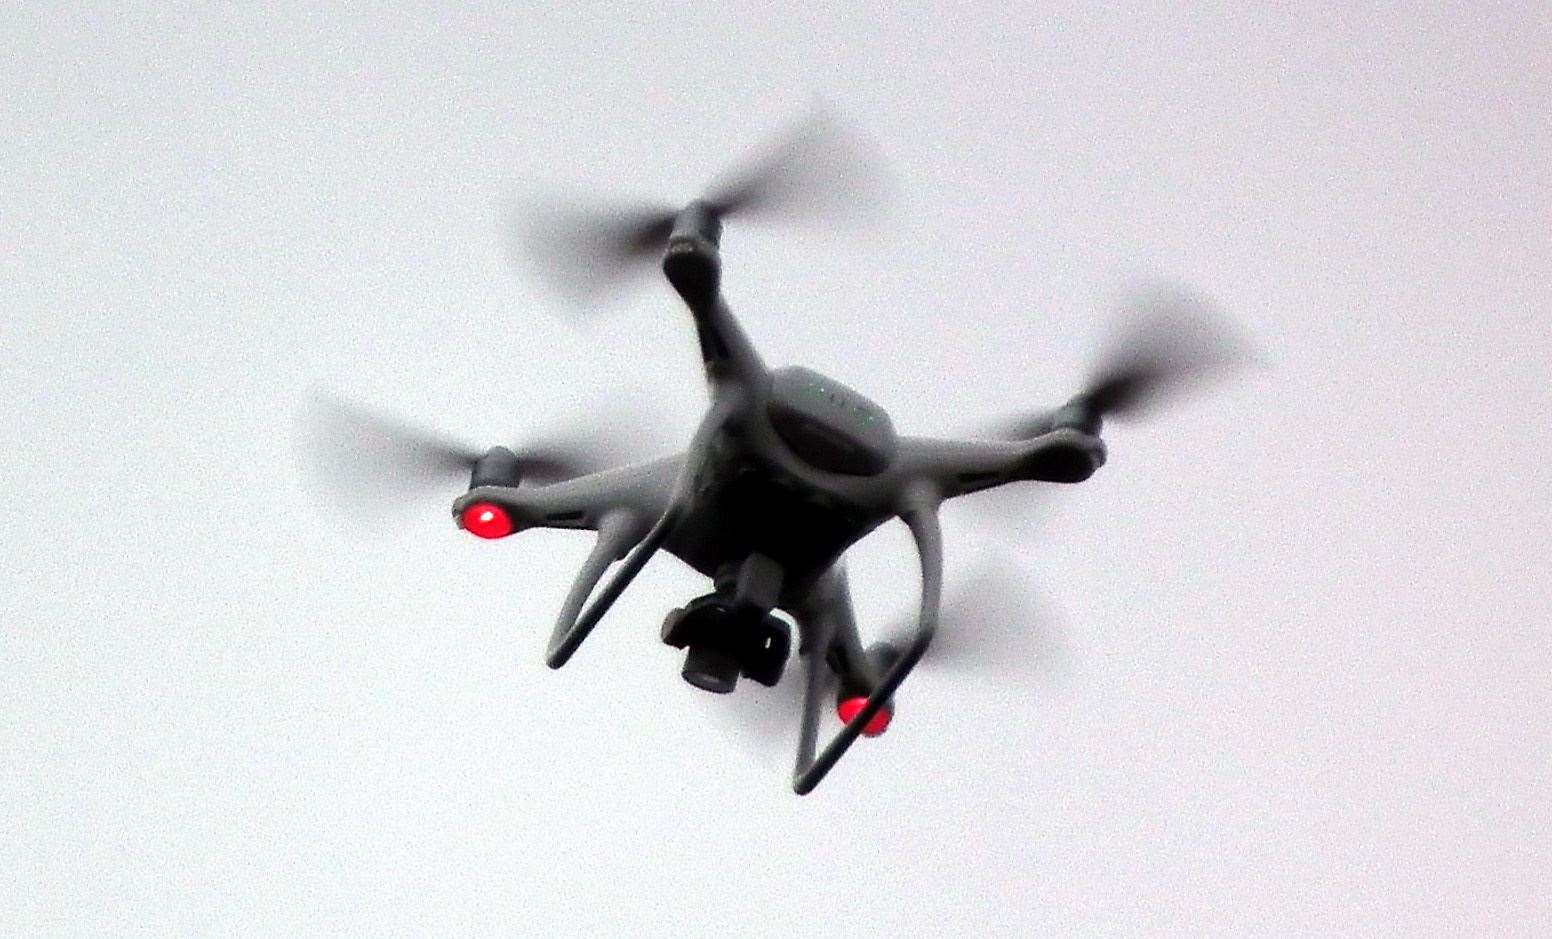 Kent Police has six drones at its disposal